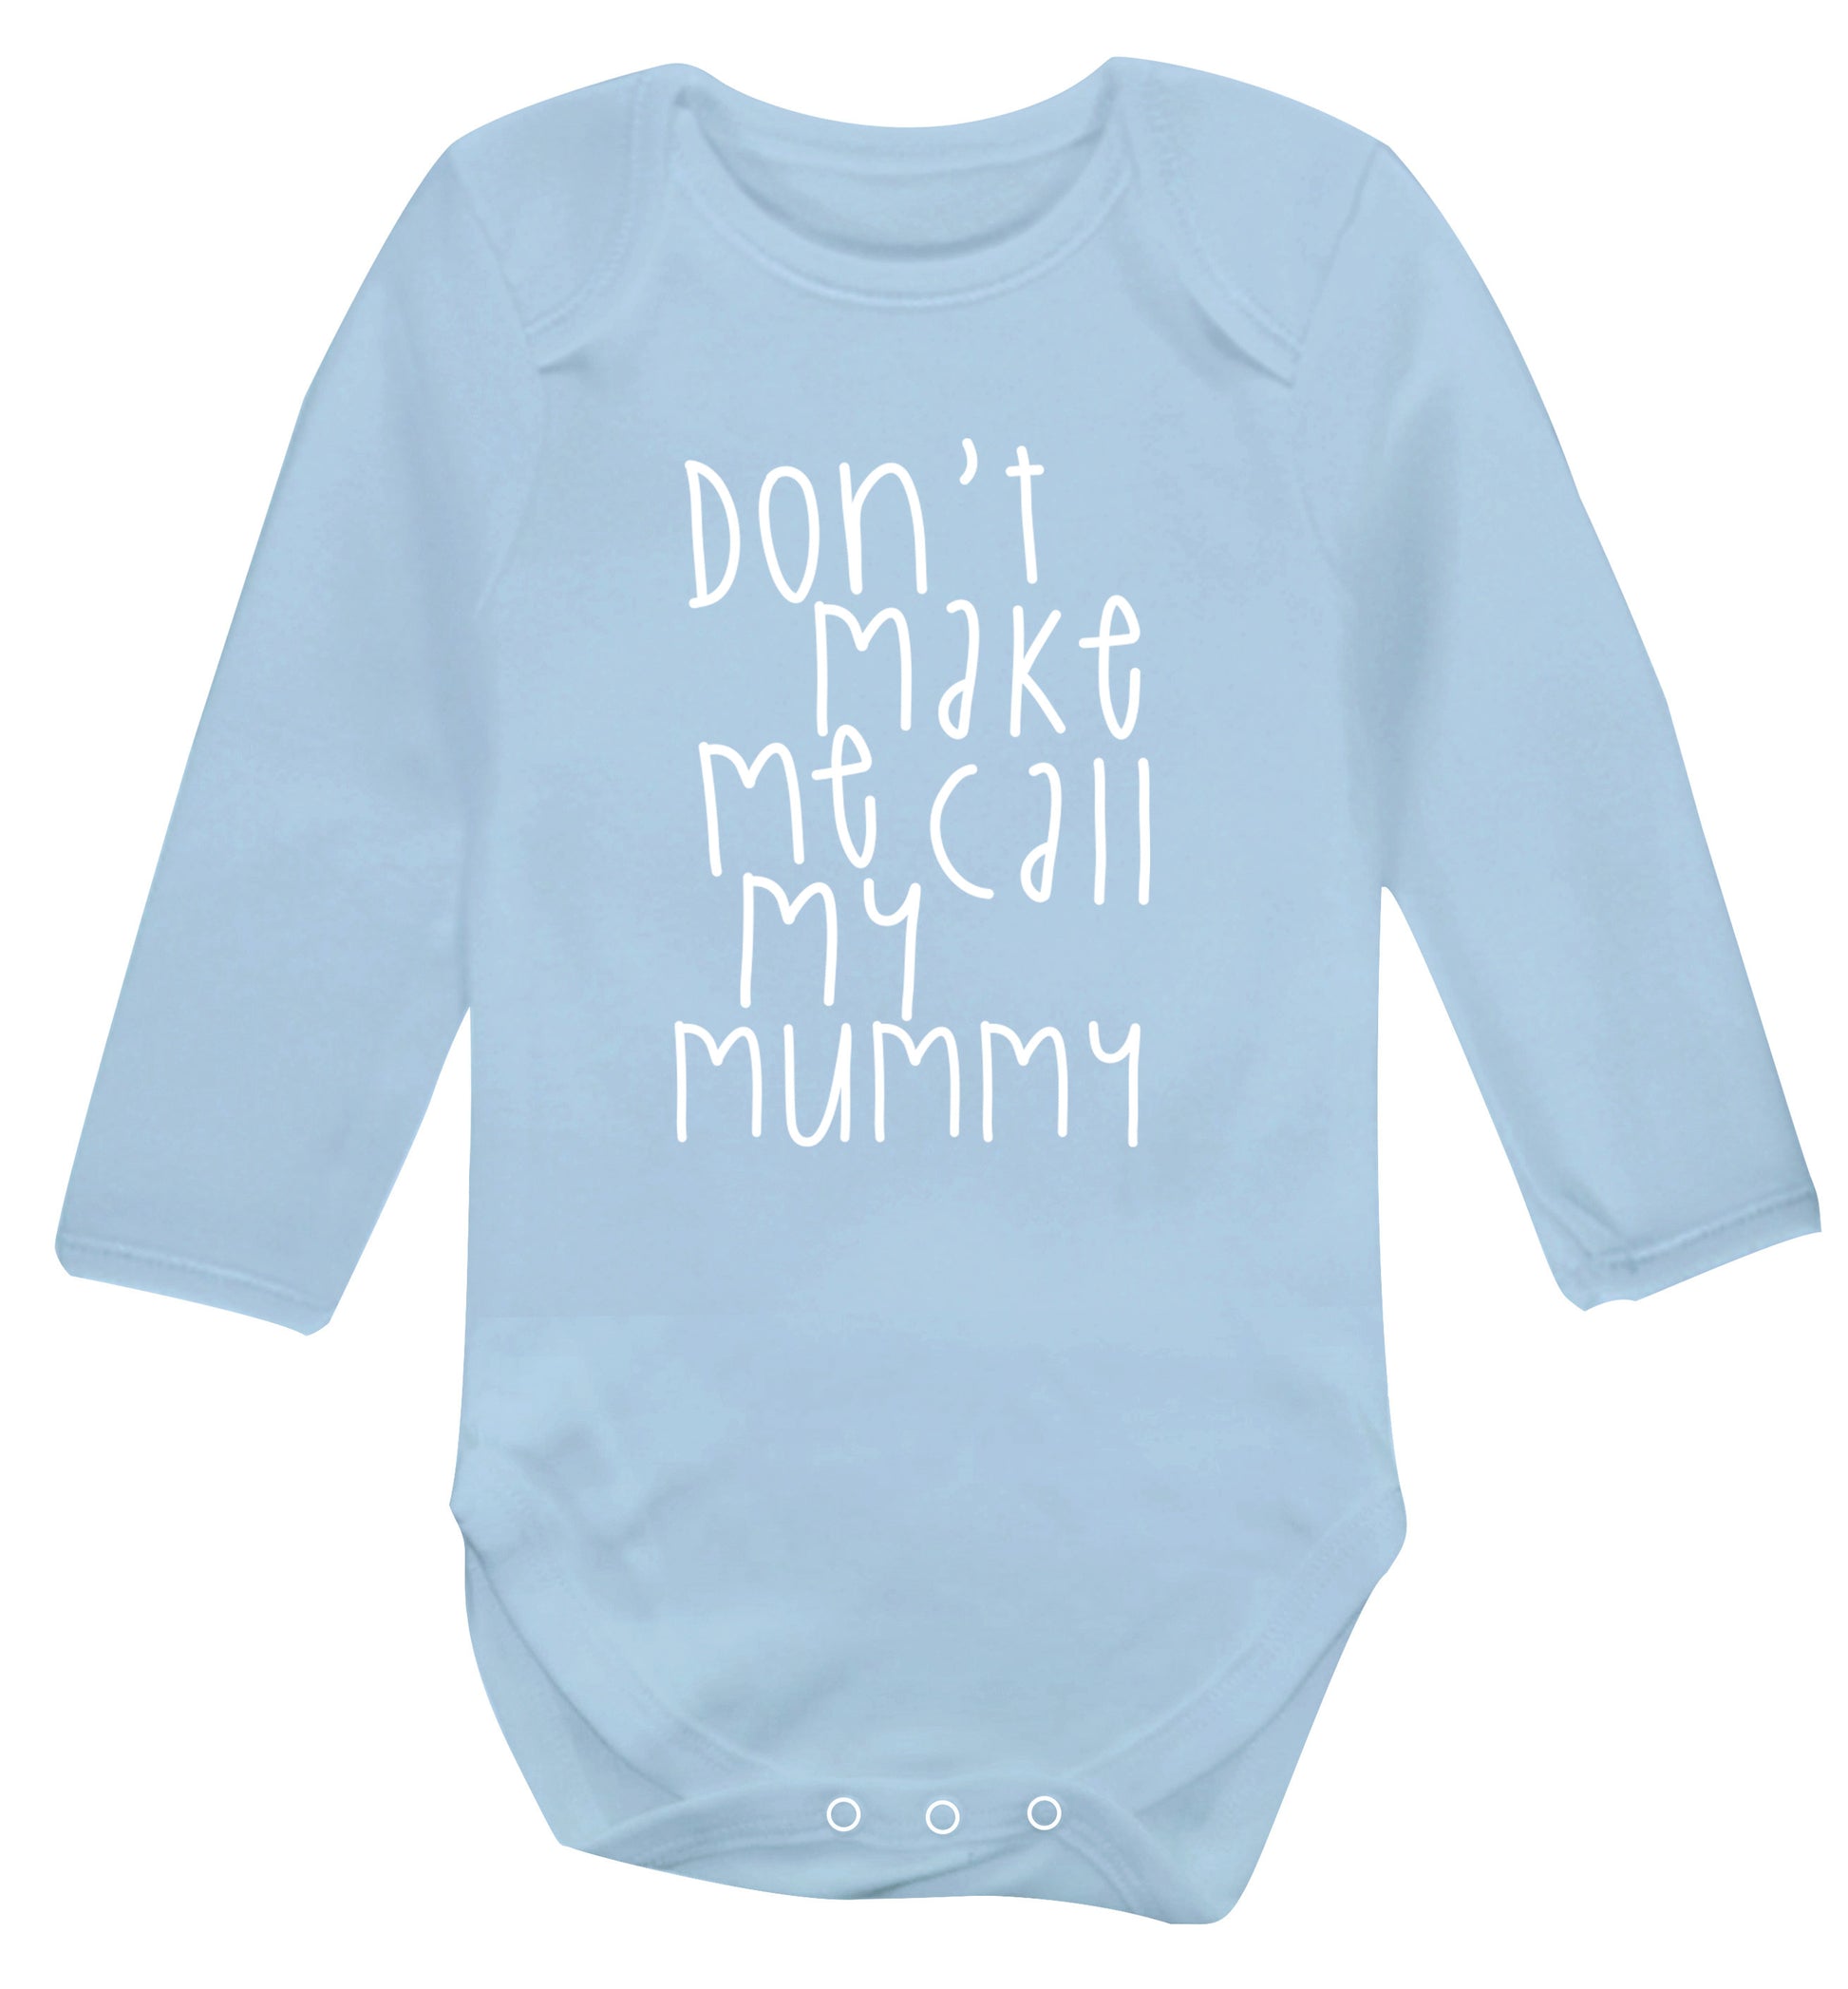 Don't make me call my mummy Baby Vest long sleeved pale blue 6-12 months